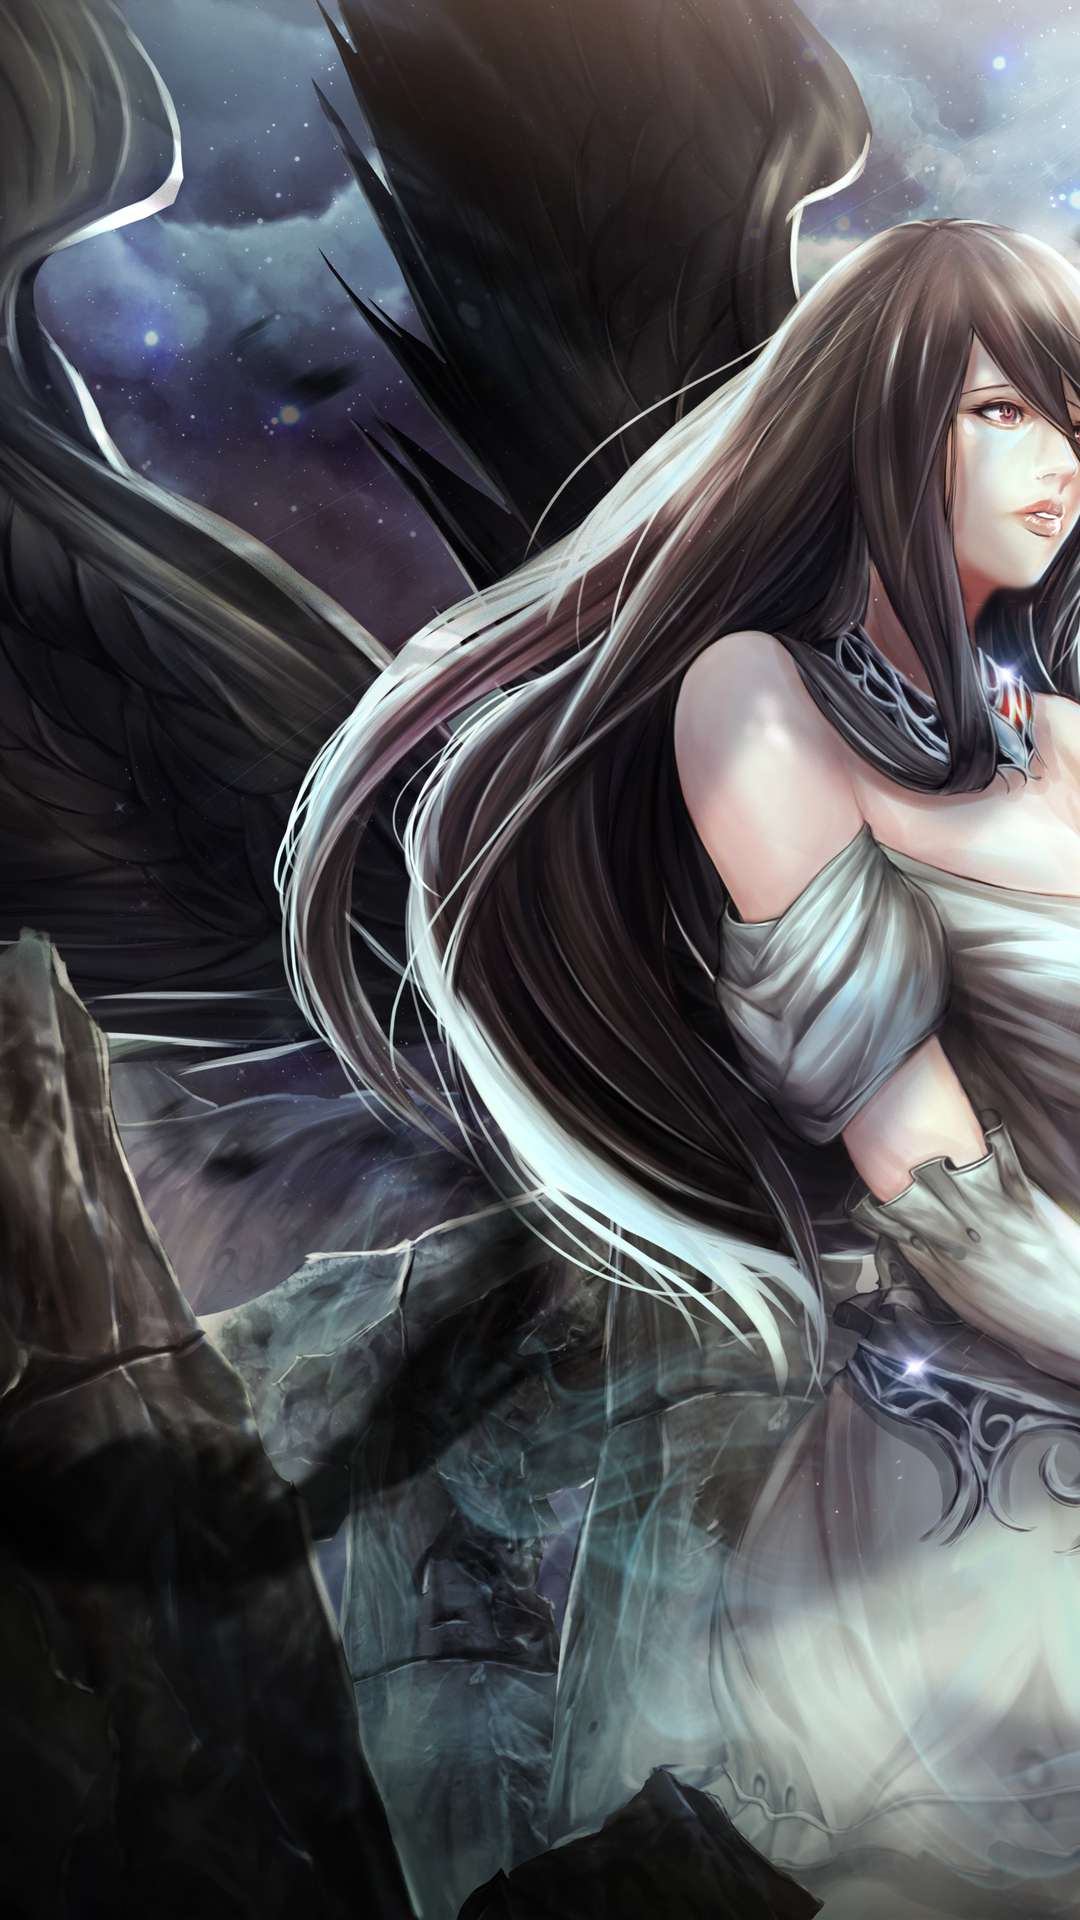 Albedo Overlord Wallpaper HD APK pour Android Télécharger